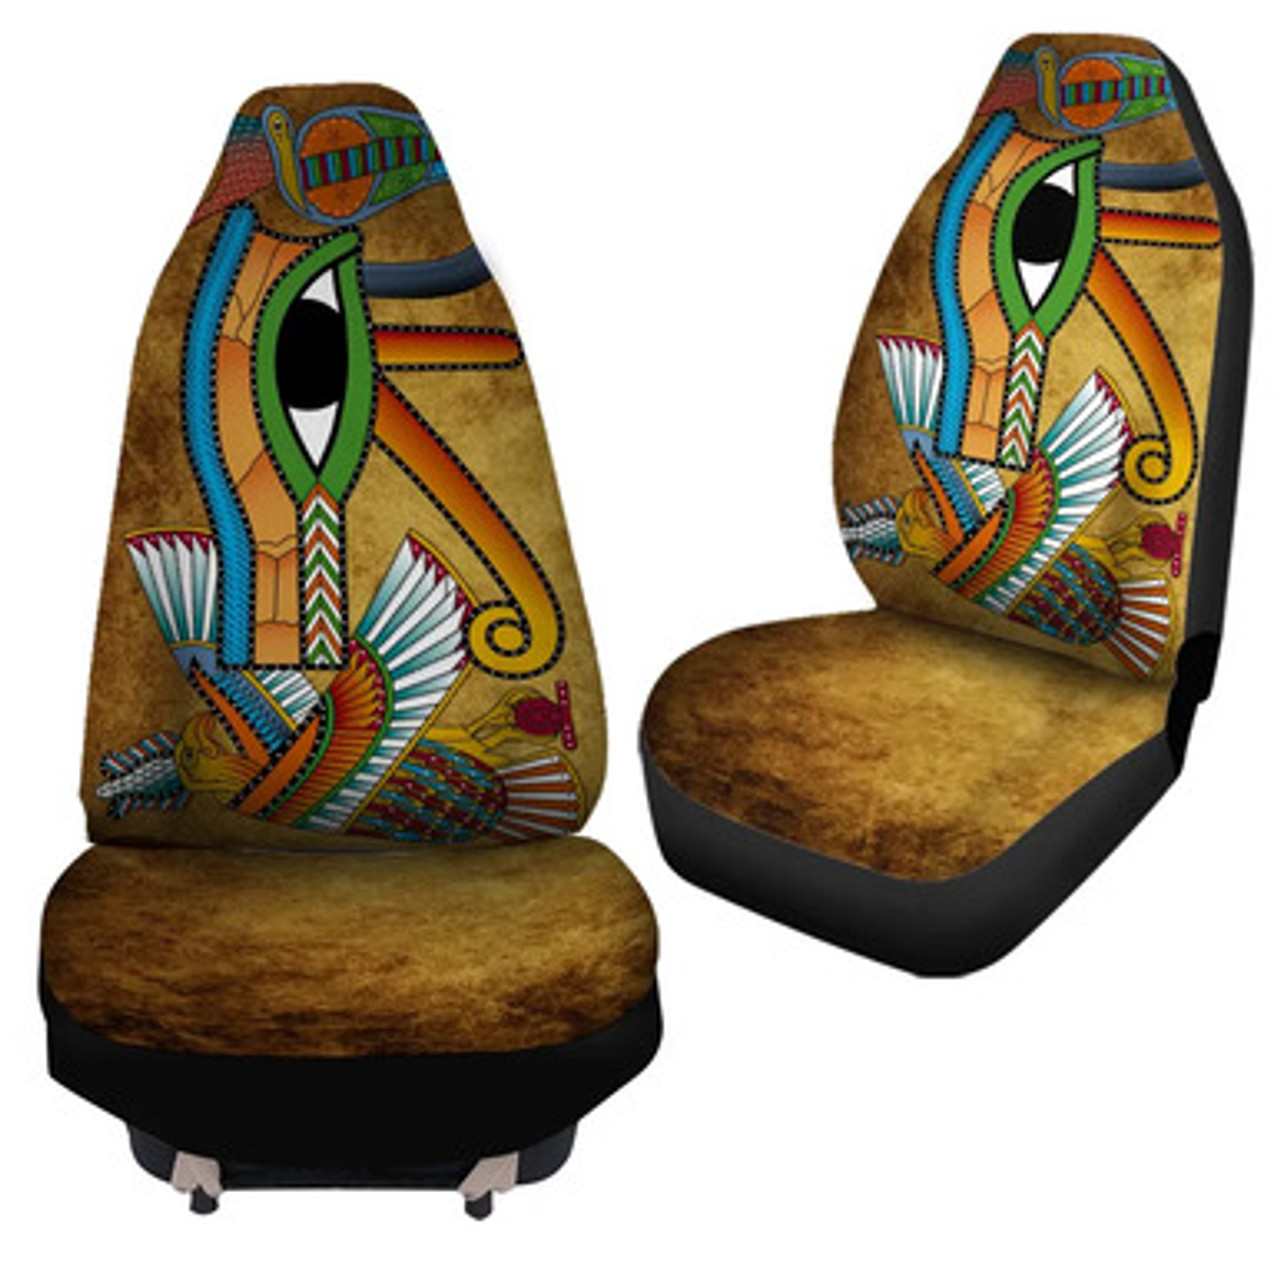 Egyptian Car Seat Cover - African Patterns Egyptian Hieroglyphics and Gods Self Knowledge Car Seat Cover